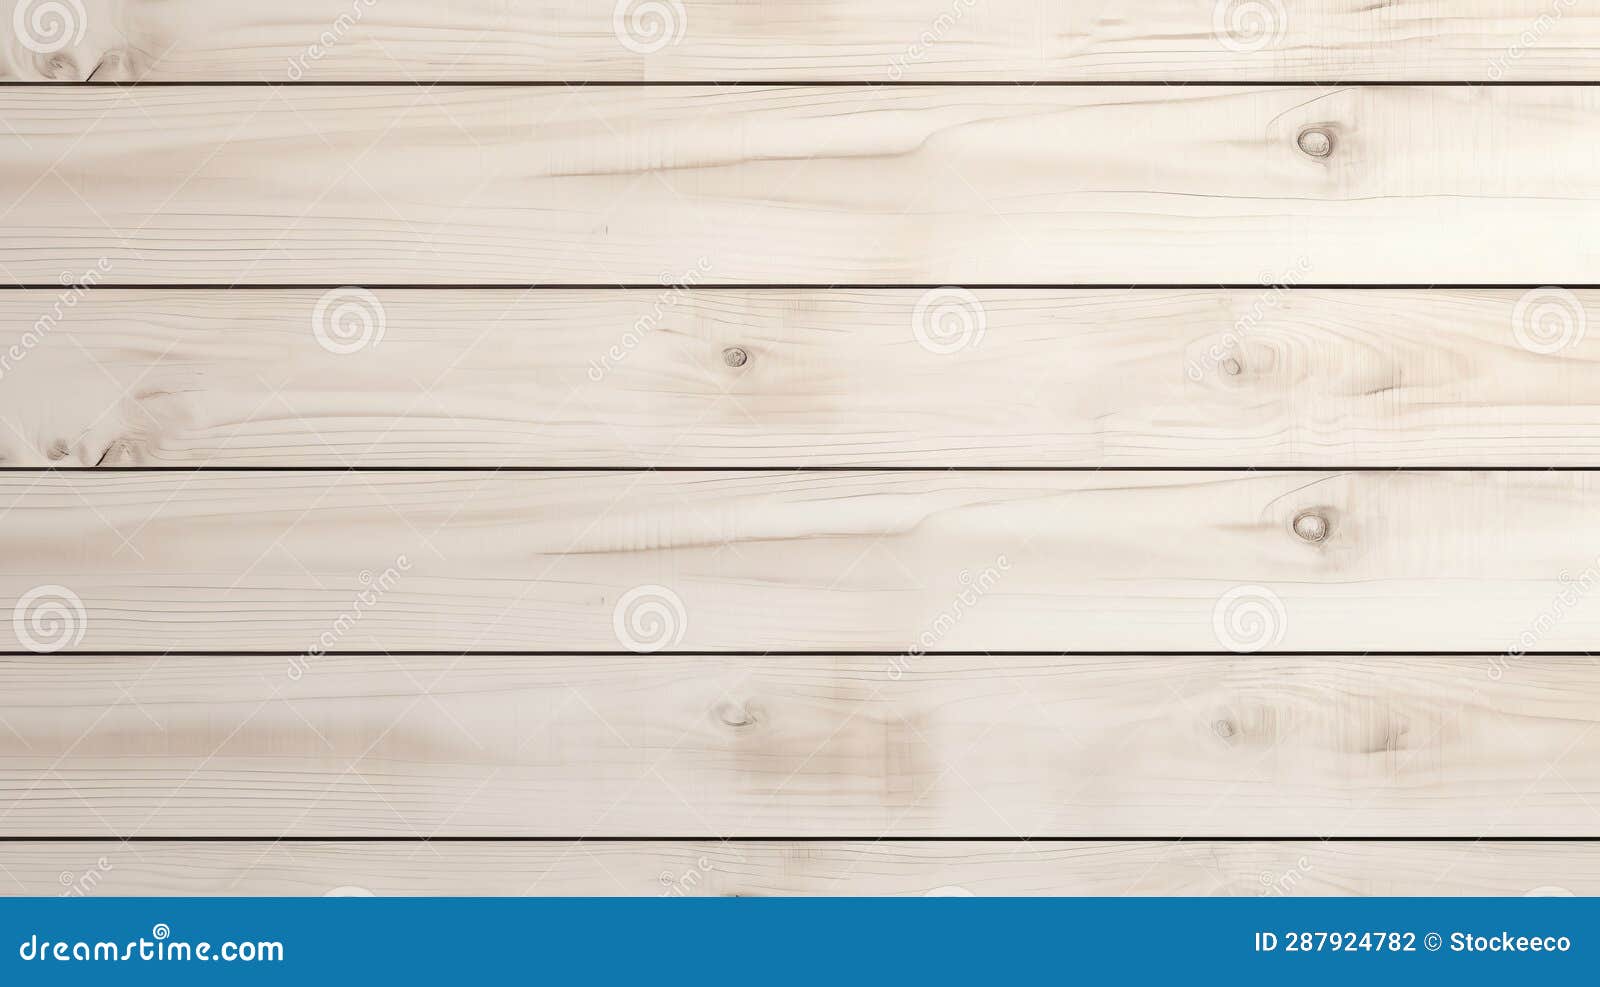 ivory wood planks background: realistic 8k photo with multilayered surfaces